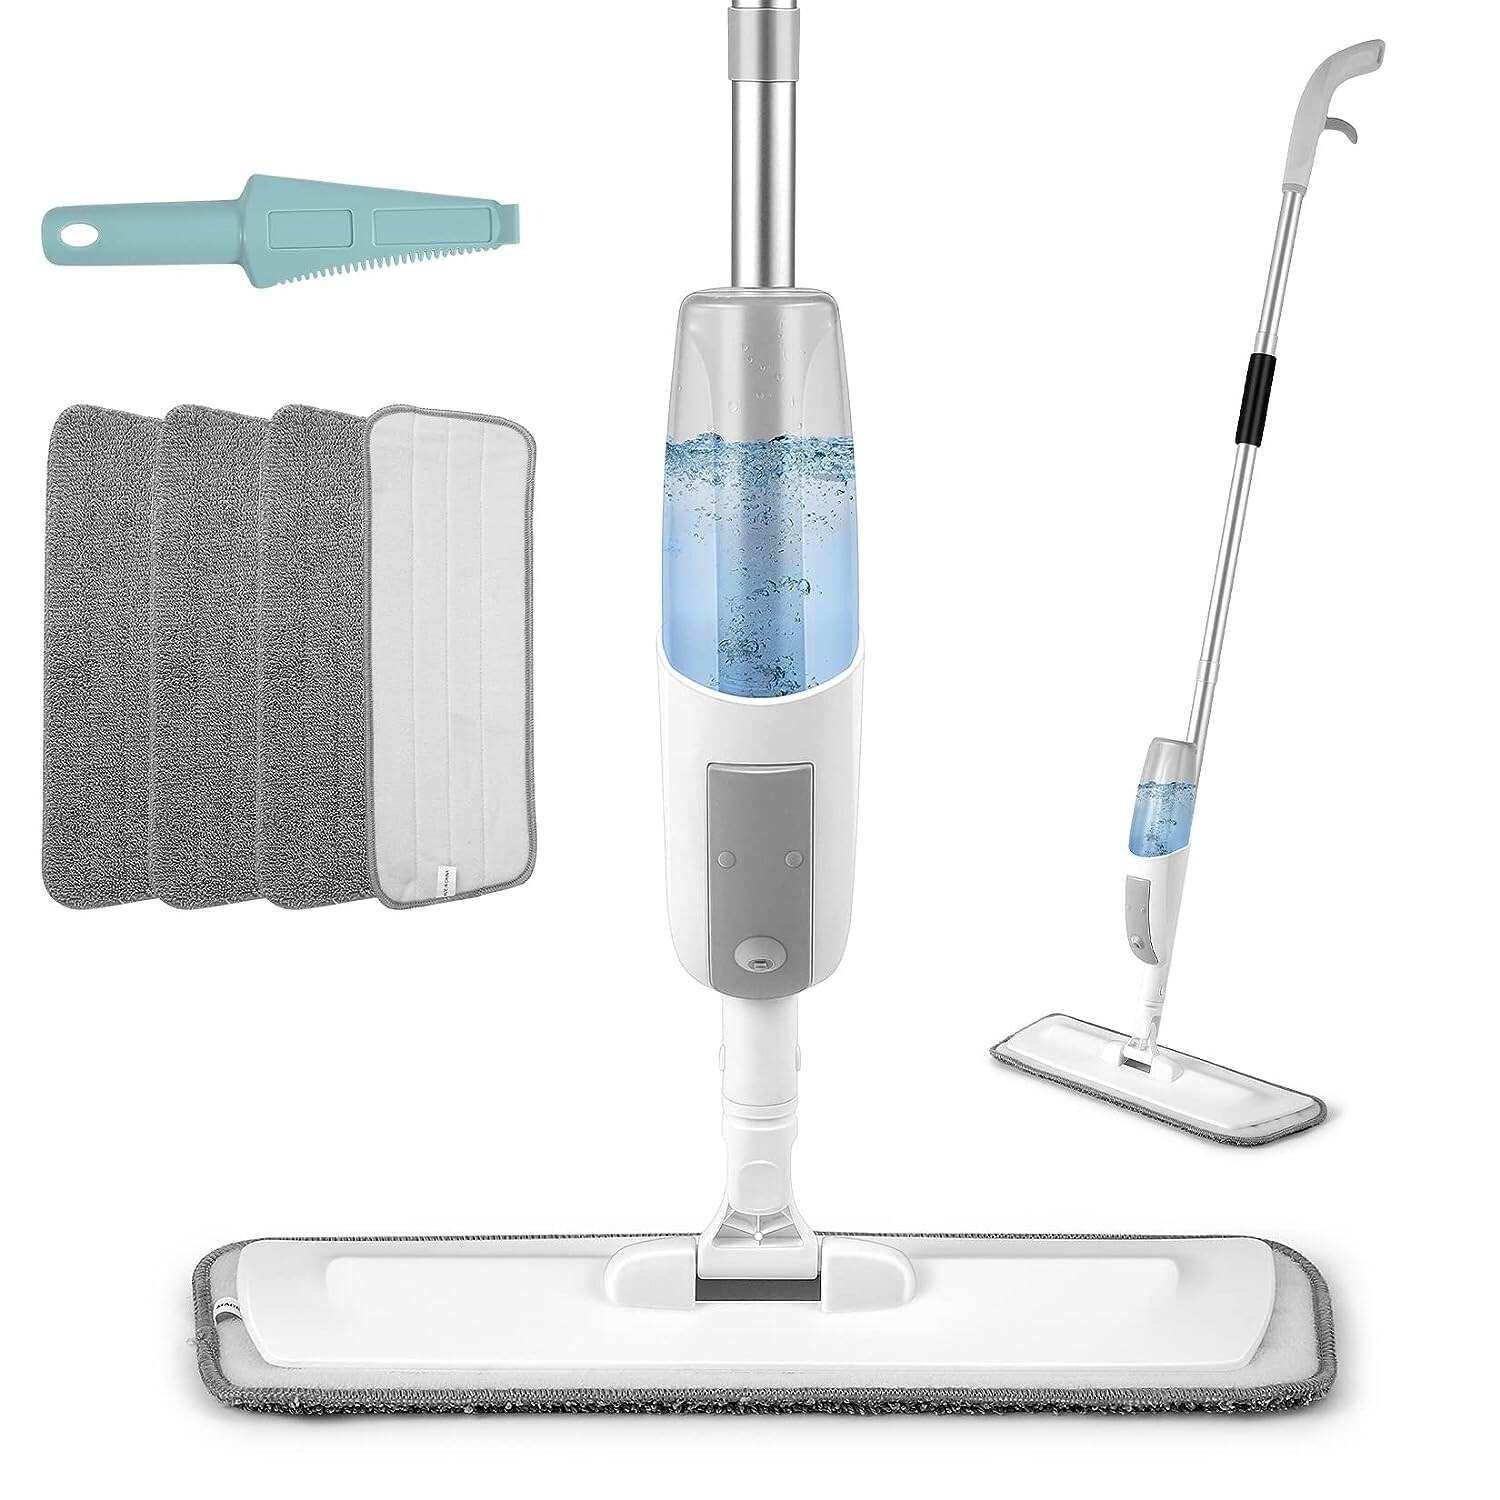 https://ak1.ostkcdn.com/images/products/is/images/direct/bf33a90adf6443914d17aec03935f20e90404499/Spray-Mop-for-Floor-Cleaning%2C-Flat-Mop-Including-4-Washable-Pads%2C-Refillable-Spray-Bottle-and-1-Scraper.jpg